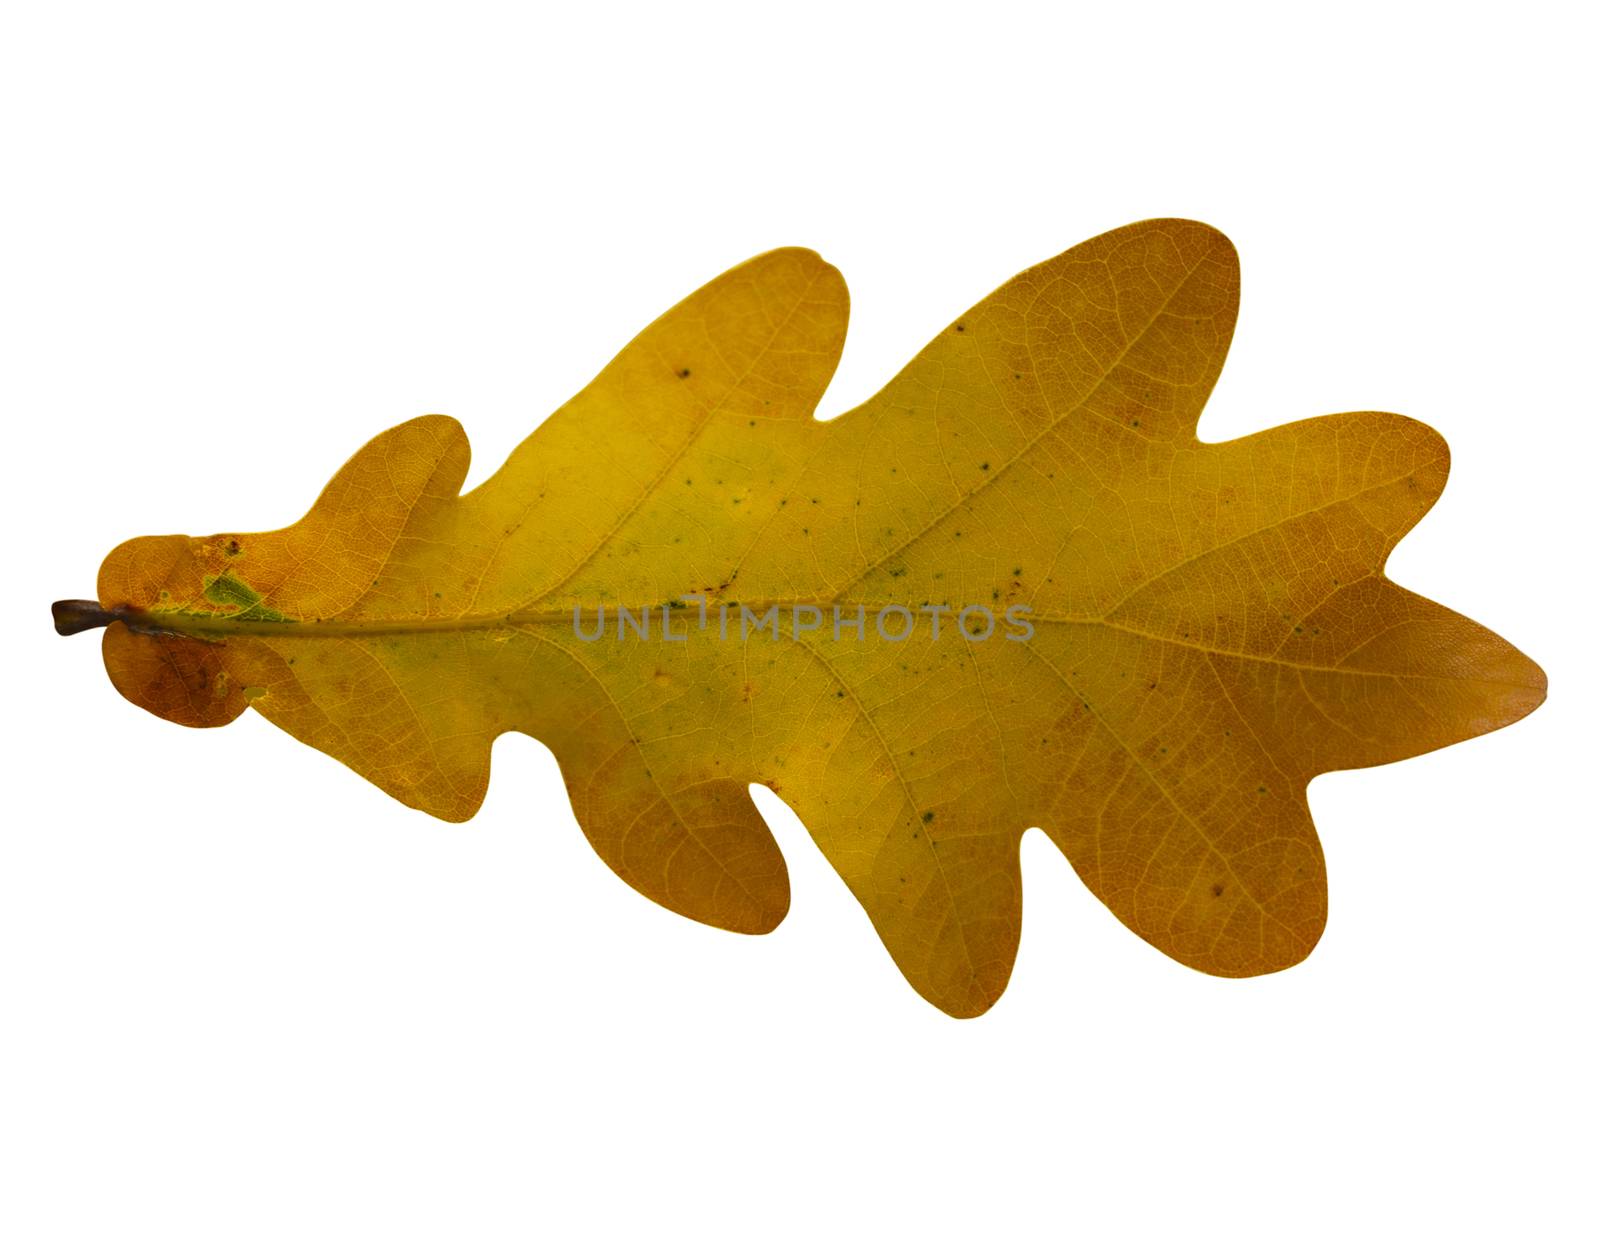 Oak leaf isolated on white background by aarrows